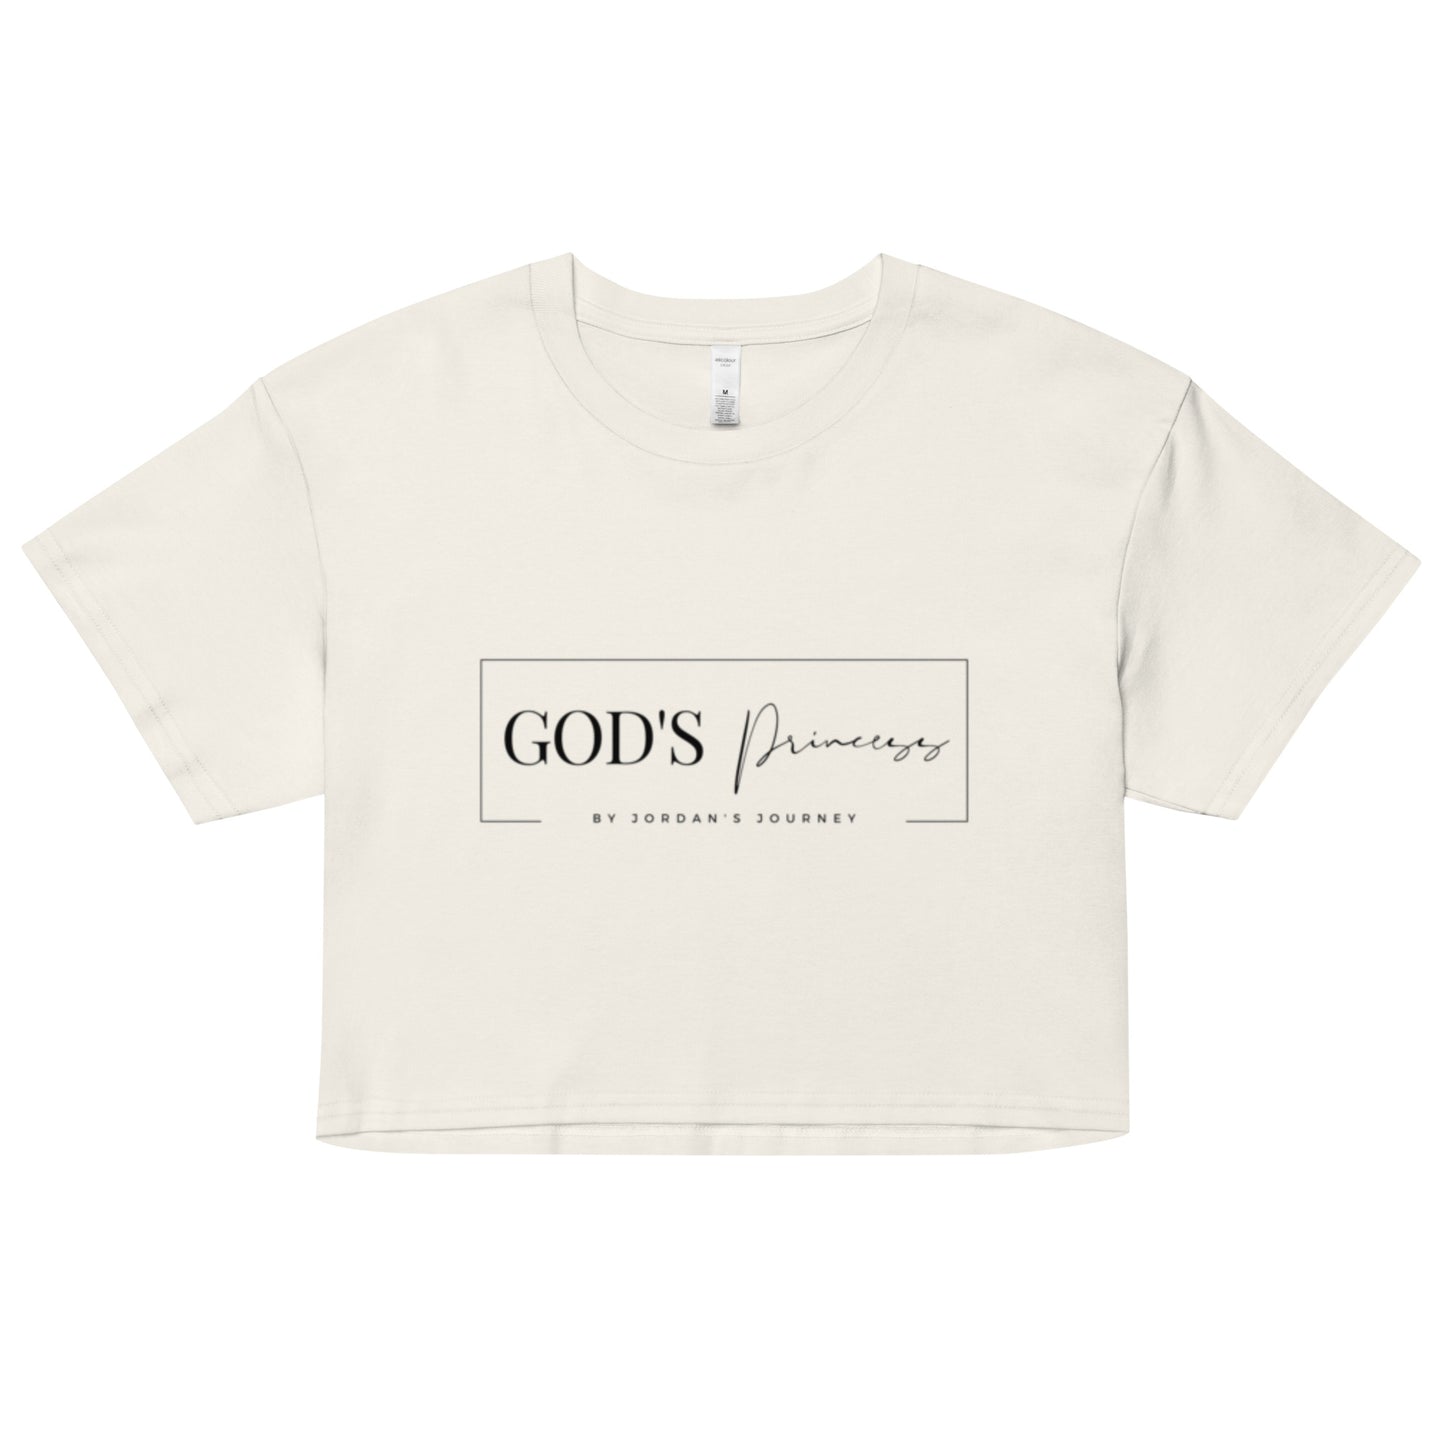 God's Princess Crop Top- White, Gray, and Nude